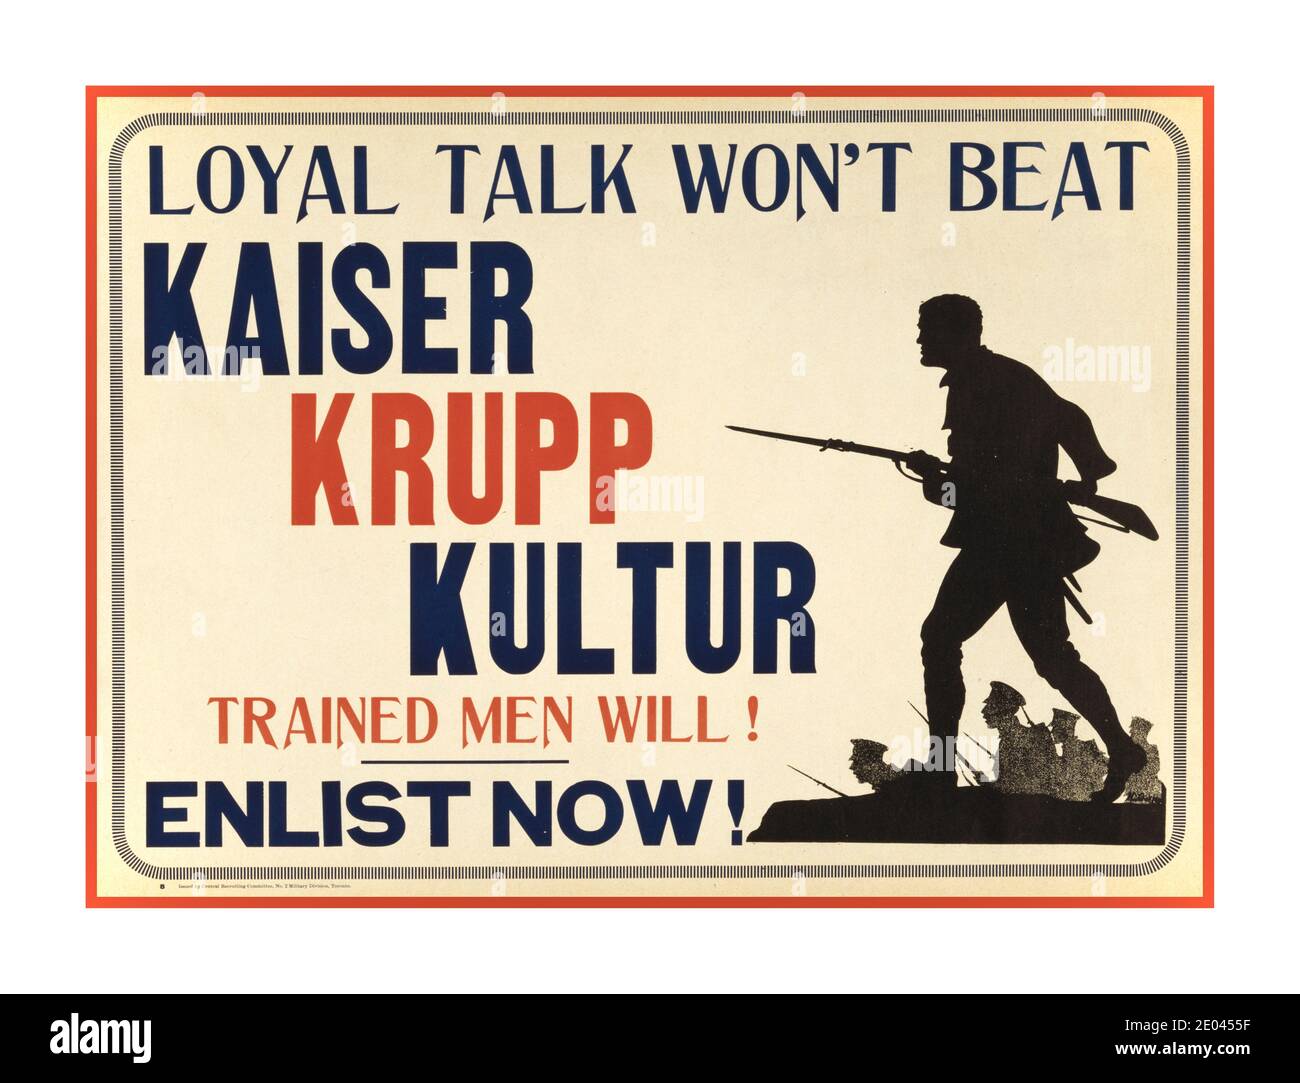 Vintage WW1 PROPAGANDA  1914 “Loyal talk won't beat Kaiser Krupp Kulture, trained men will! Enlist now!” Recruitment Poster shows silhouette of soldiers in battle. Toronto : Central Recruiting Committee, No. 2 Military Division , [between 1914 and 1918] -  Canada.--Canadian Army--Recruiting & enlistment--1910-1920 -  World War, 1914-1918--Recruiting & enlistment--Canada Lithographs--Color--1910-1920. War posters--Canadian--1910-1920. Stock Photo